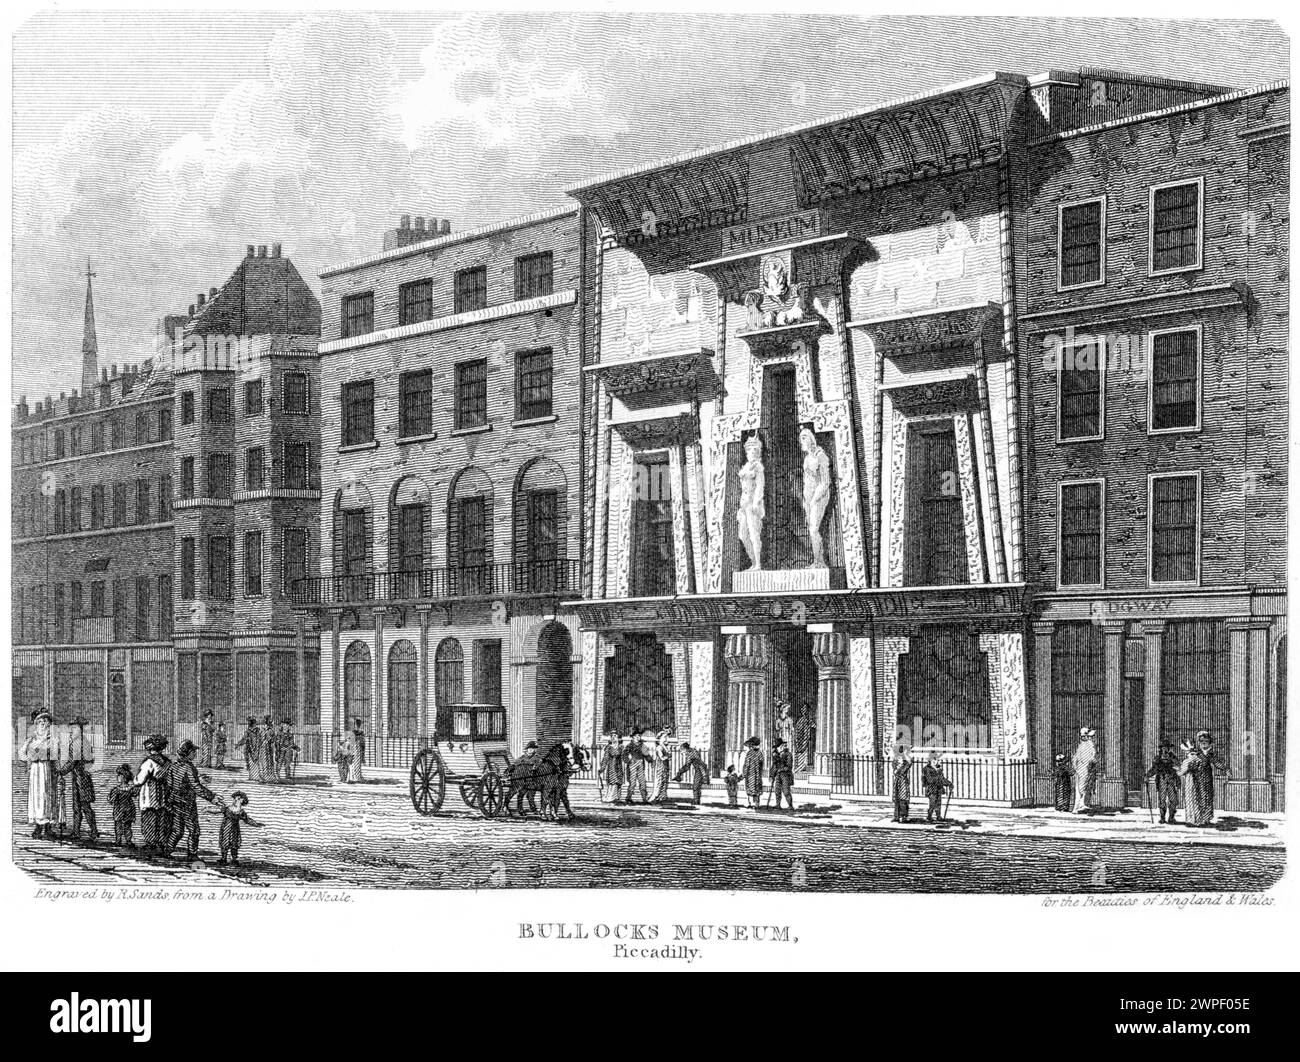 An engraving entitled Bullocks Museum, Piccadilly, London UK scanned at high resolution from a book published around 1815. Stock Photo